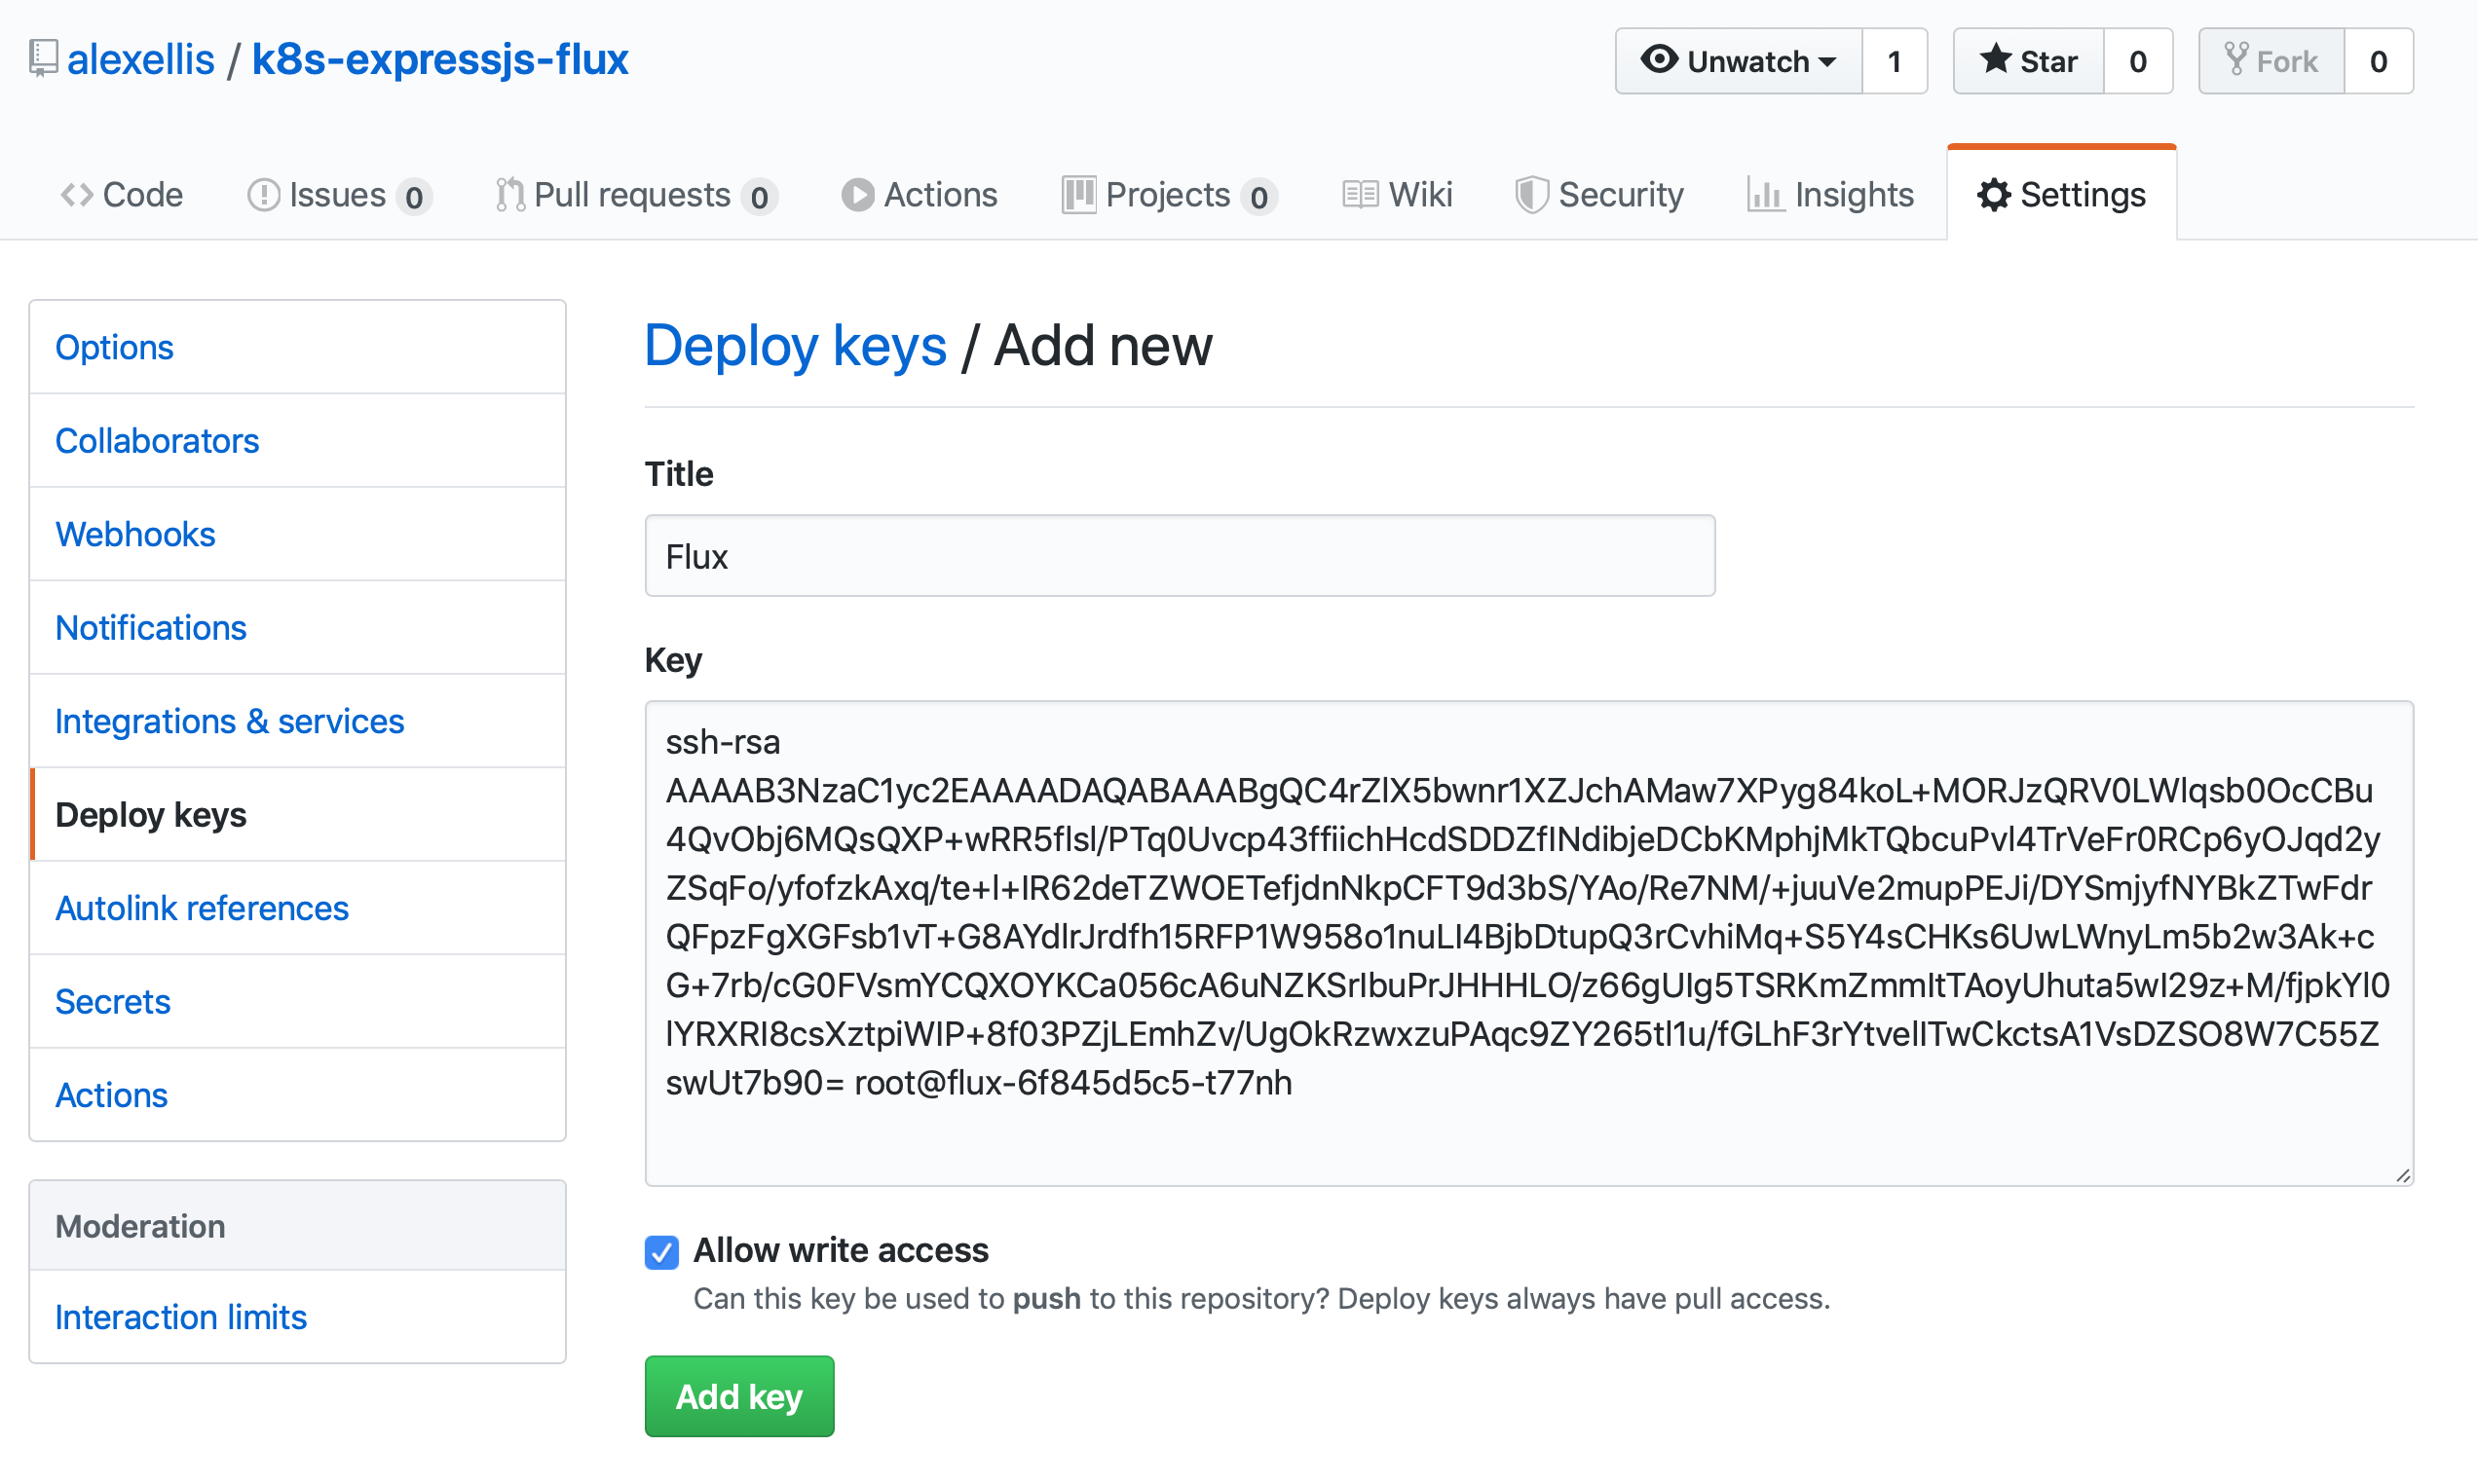 Adding a deploy key to the repo